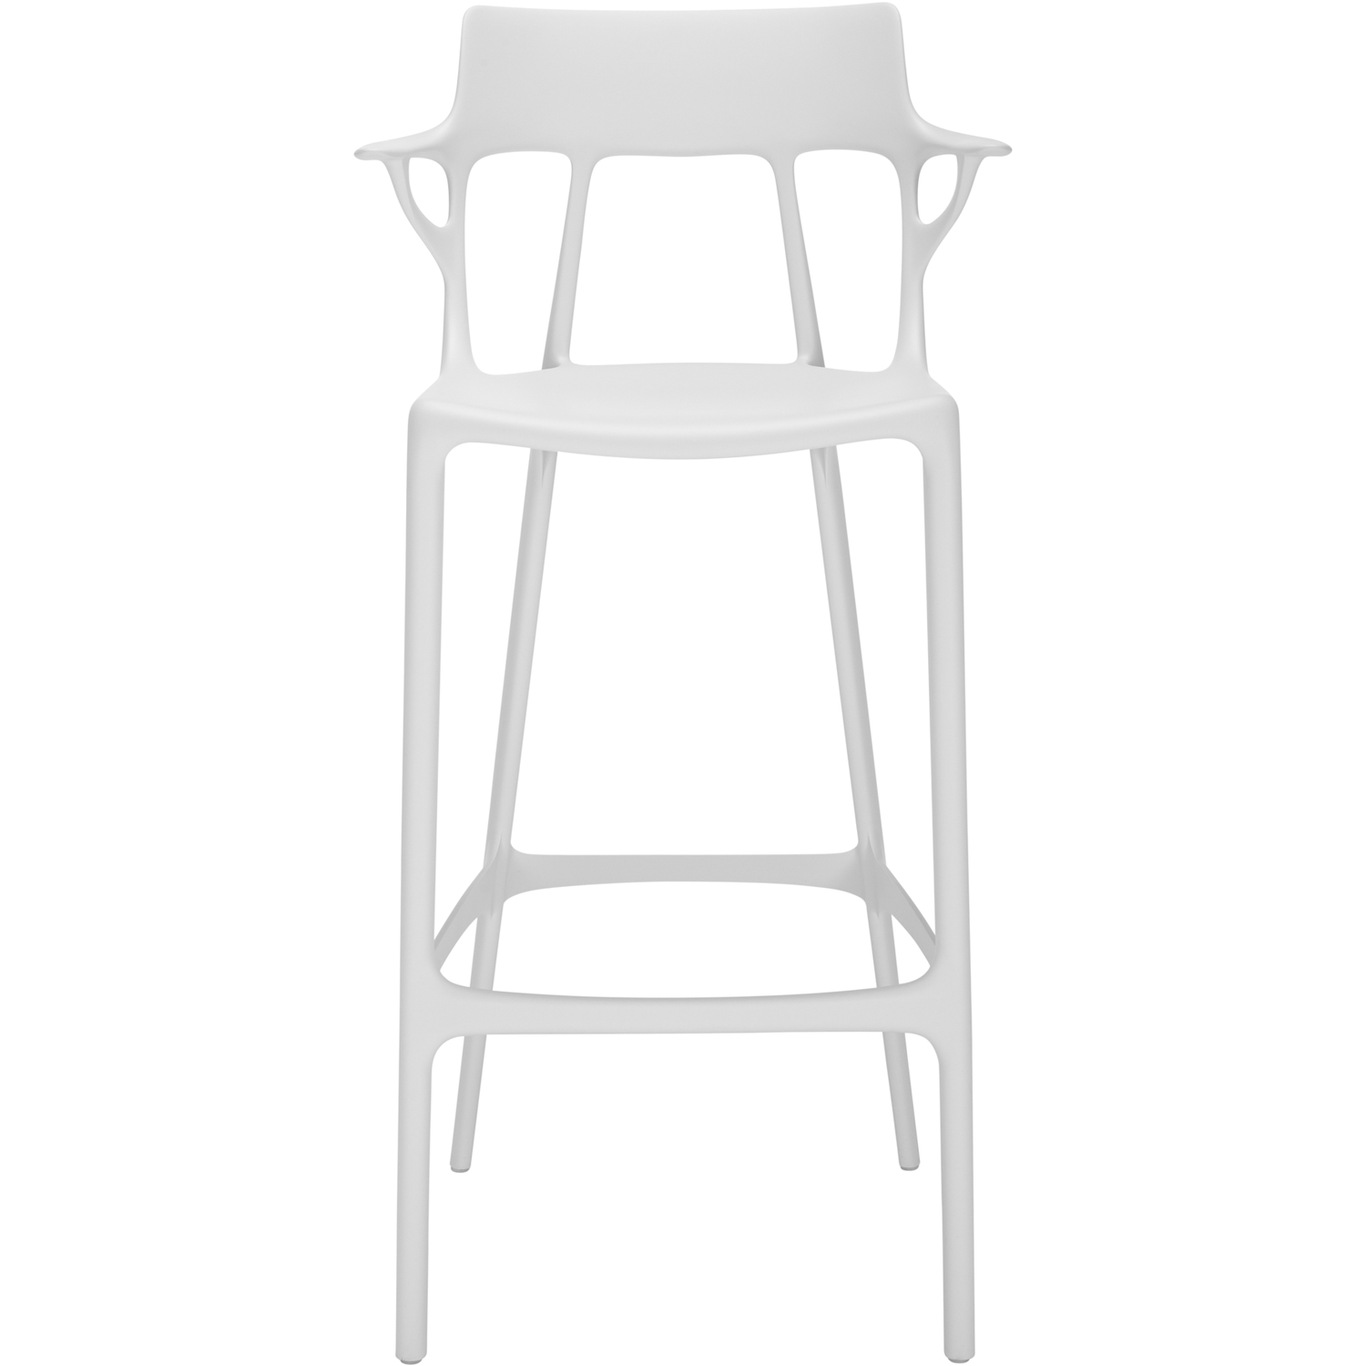 A.I. Bar Stool Recycled 75 cm, White